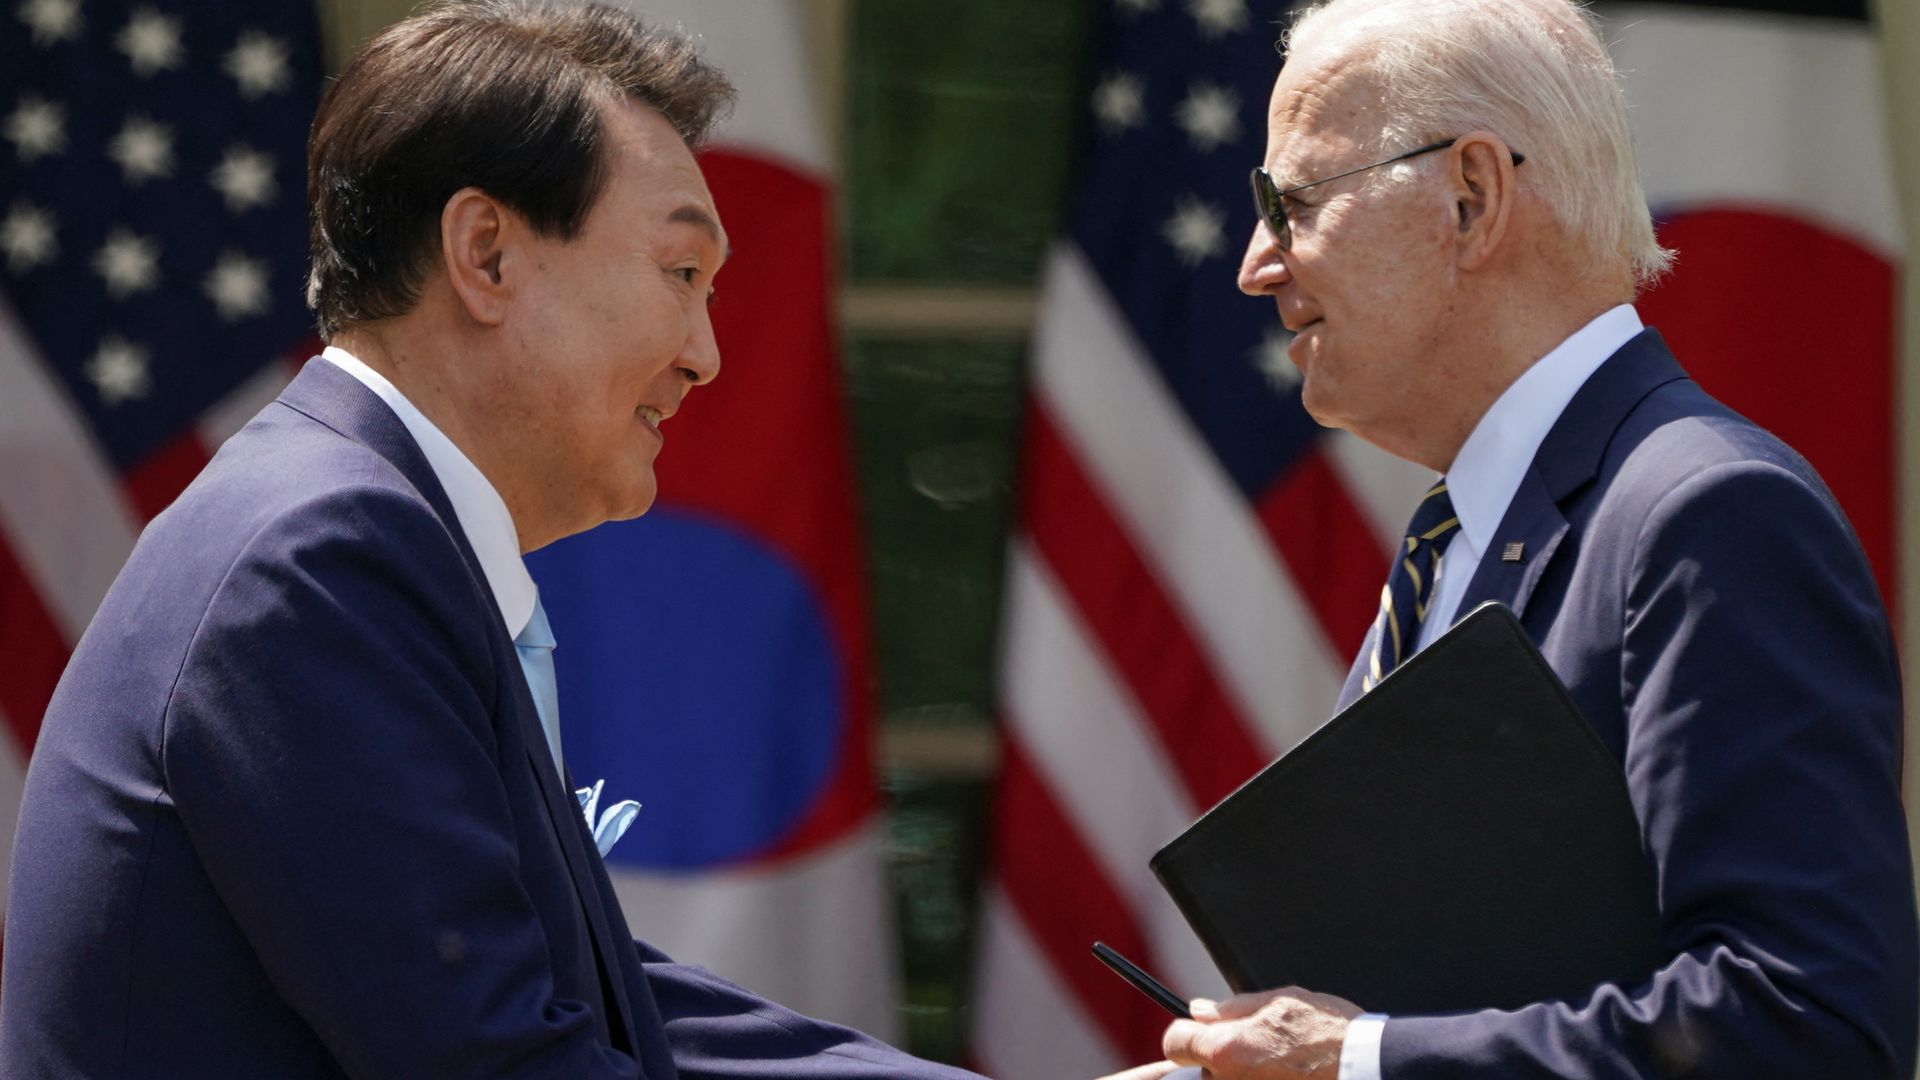 President Biden signed an agreement that will see the United States dock nuclear-armed submarines in South Korea.